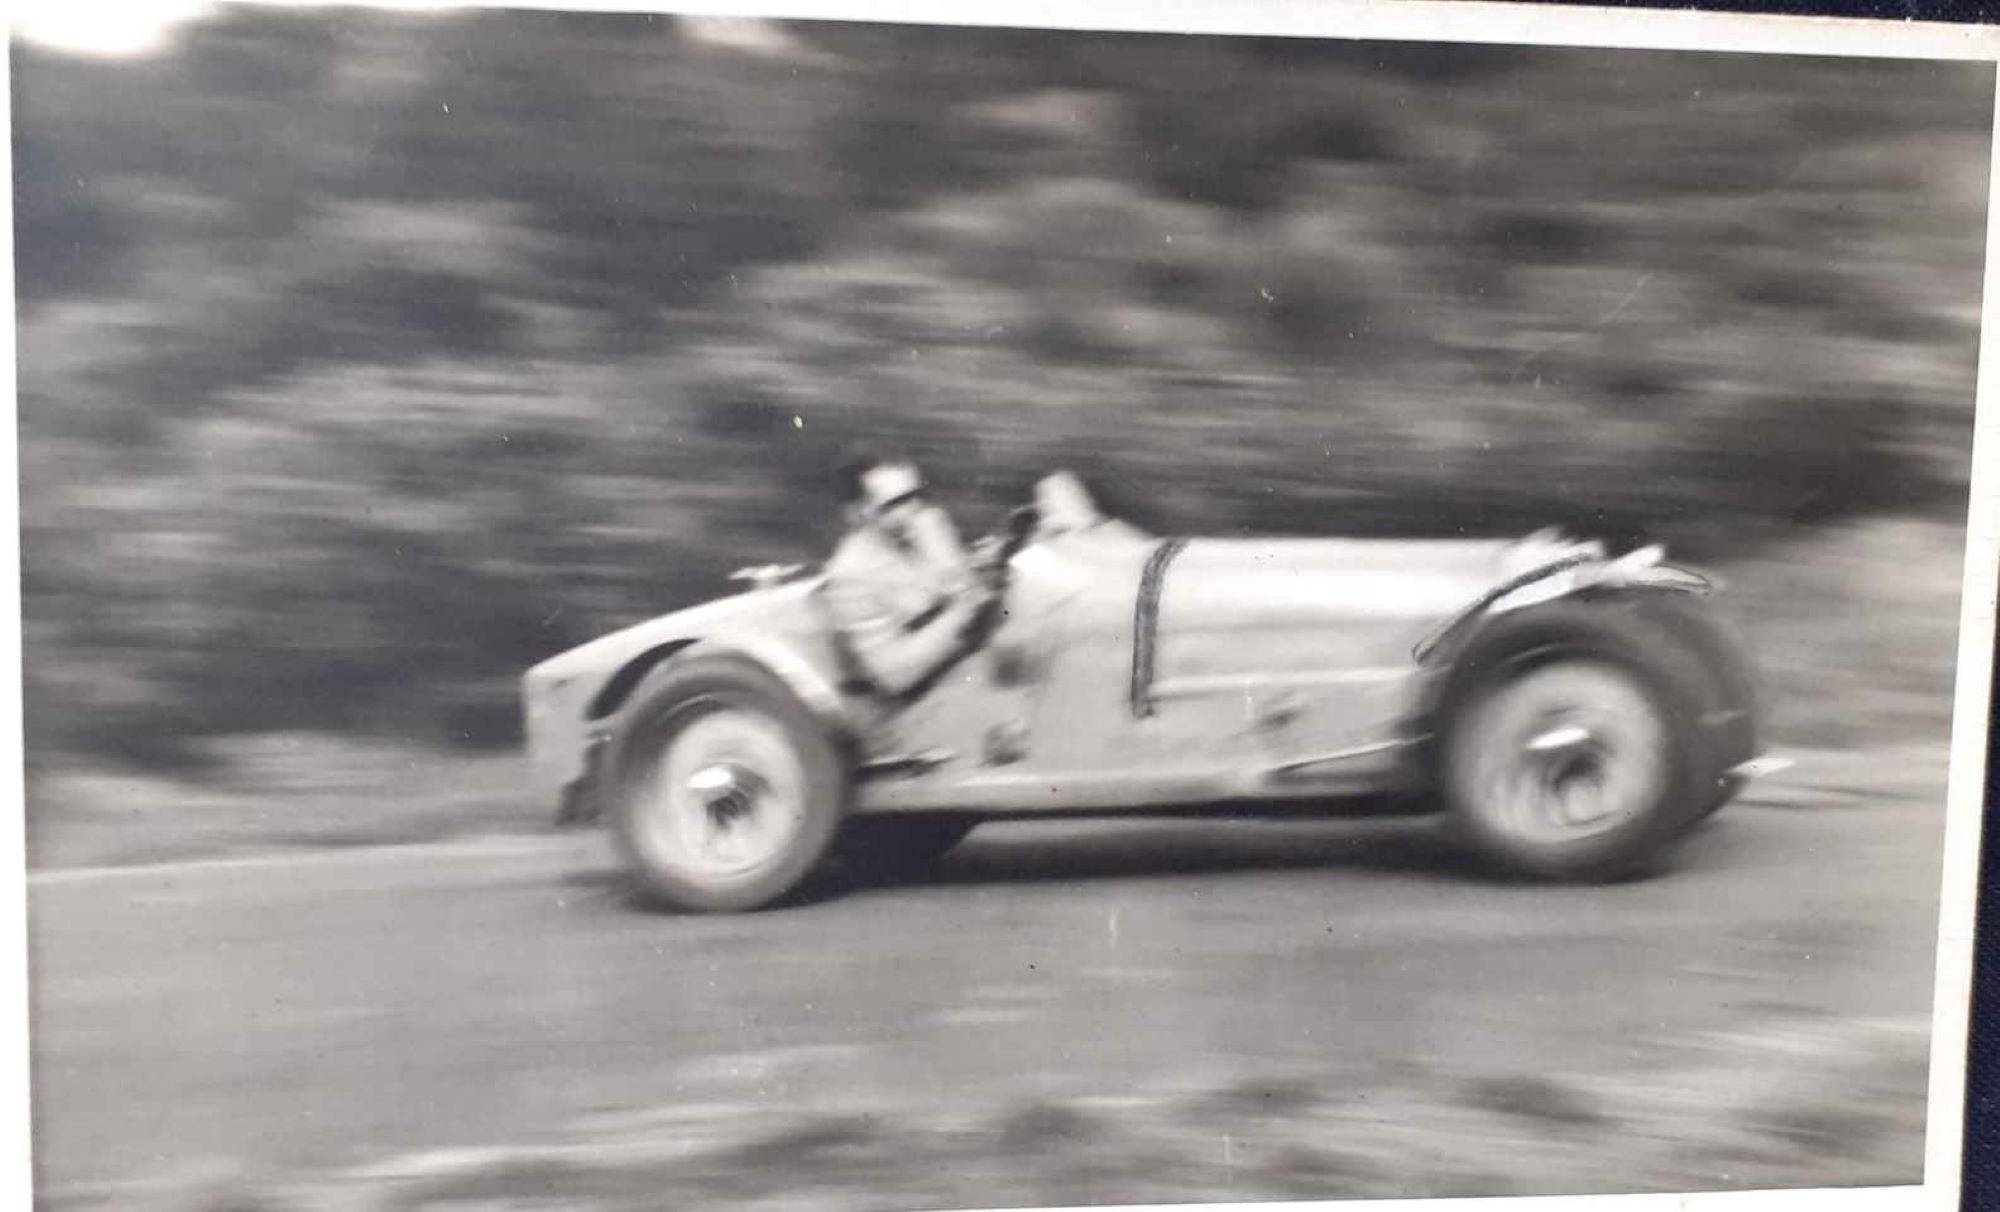 Name:  NSCC 1950 #0116 Bugatti T35 at speed - light colour 1950's - image Graeme Wells arch Anthony Wel.jpg
Views: 215
Size:  158.1 KB